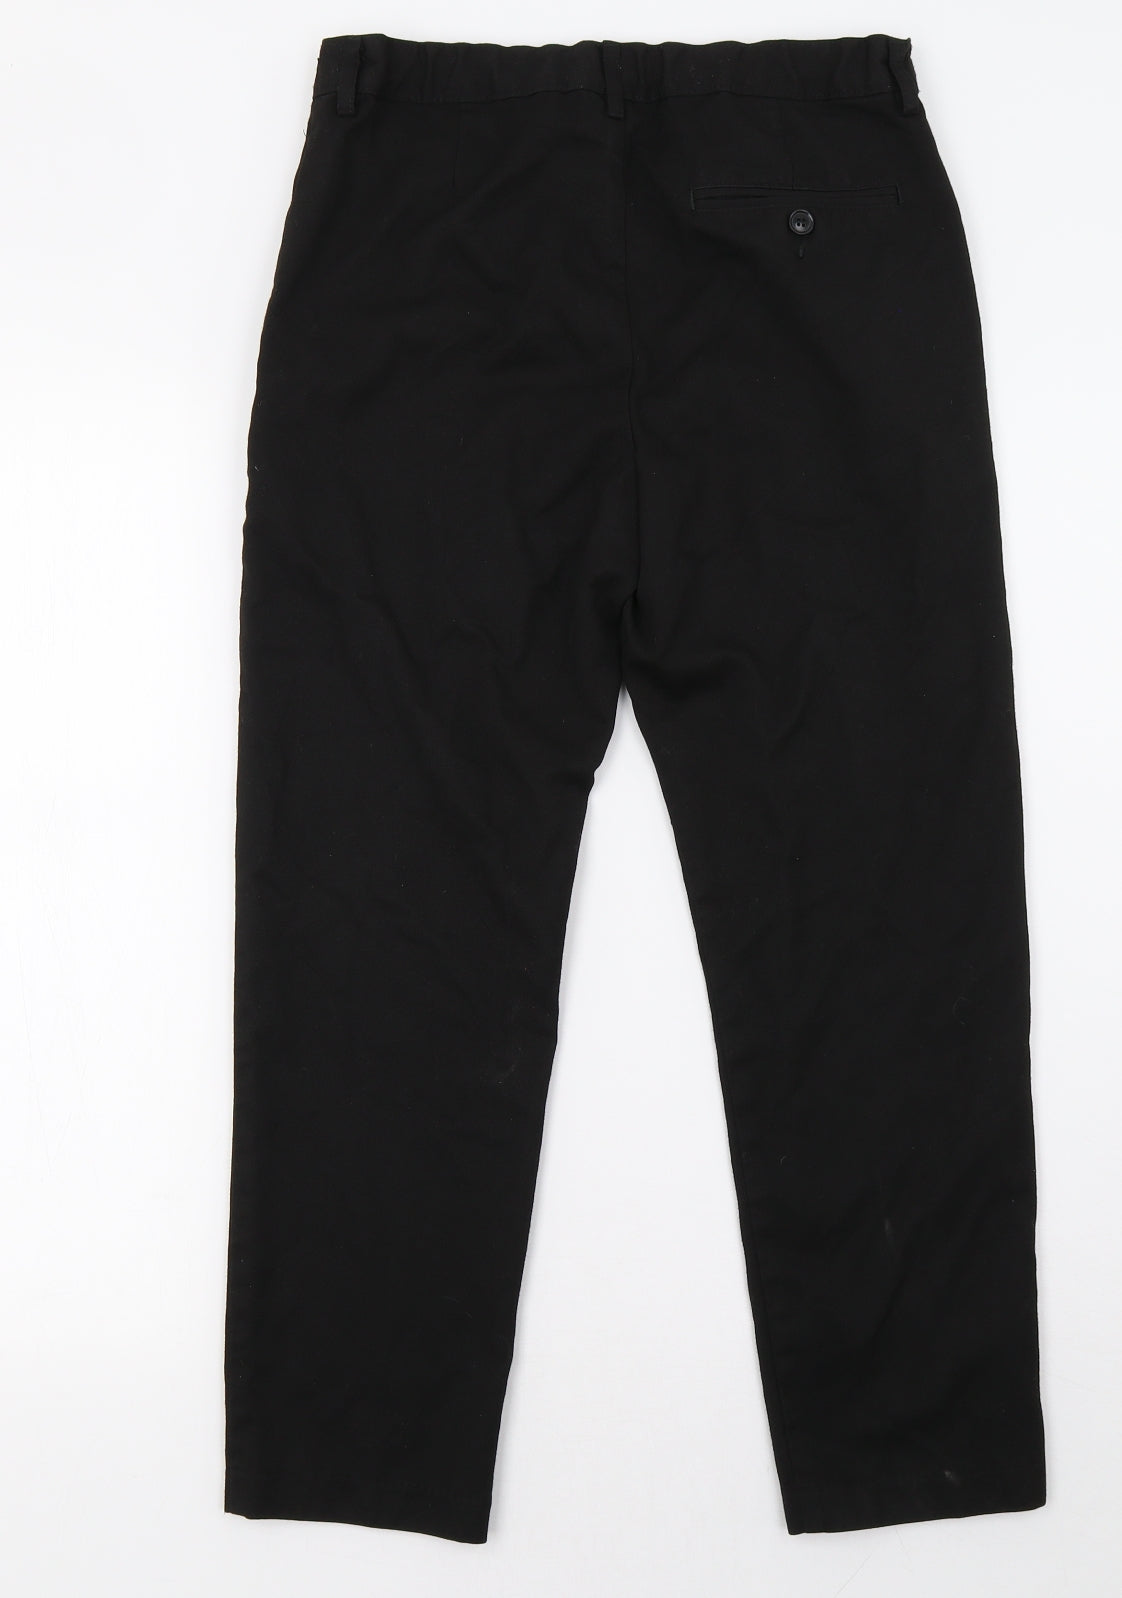 NEXT Boys Black    Trousers Size 12 Years